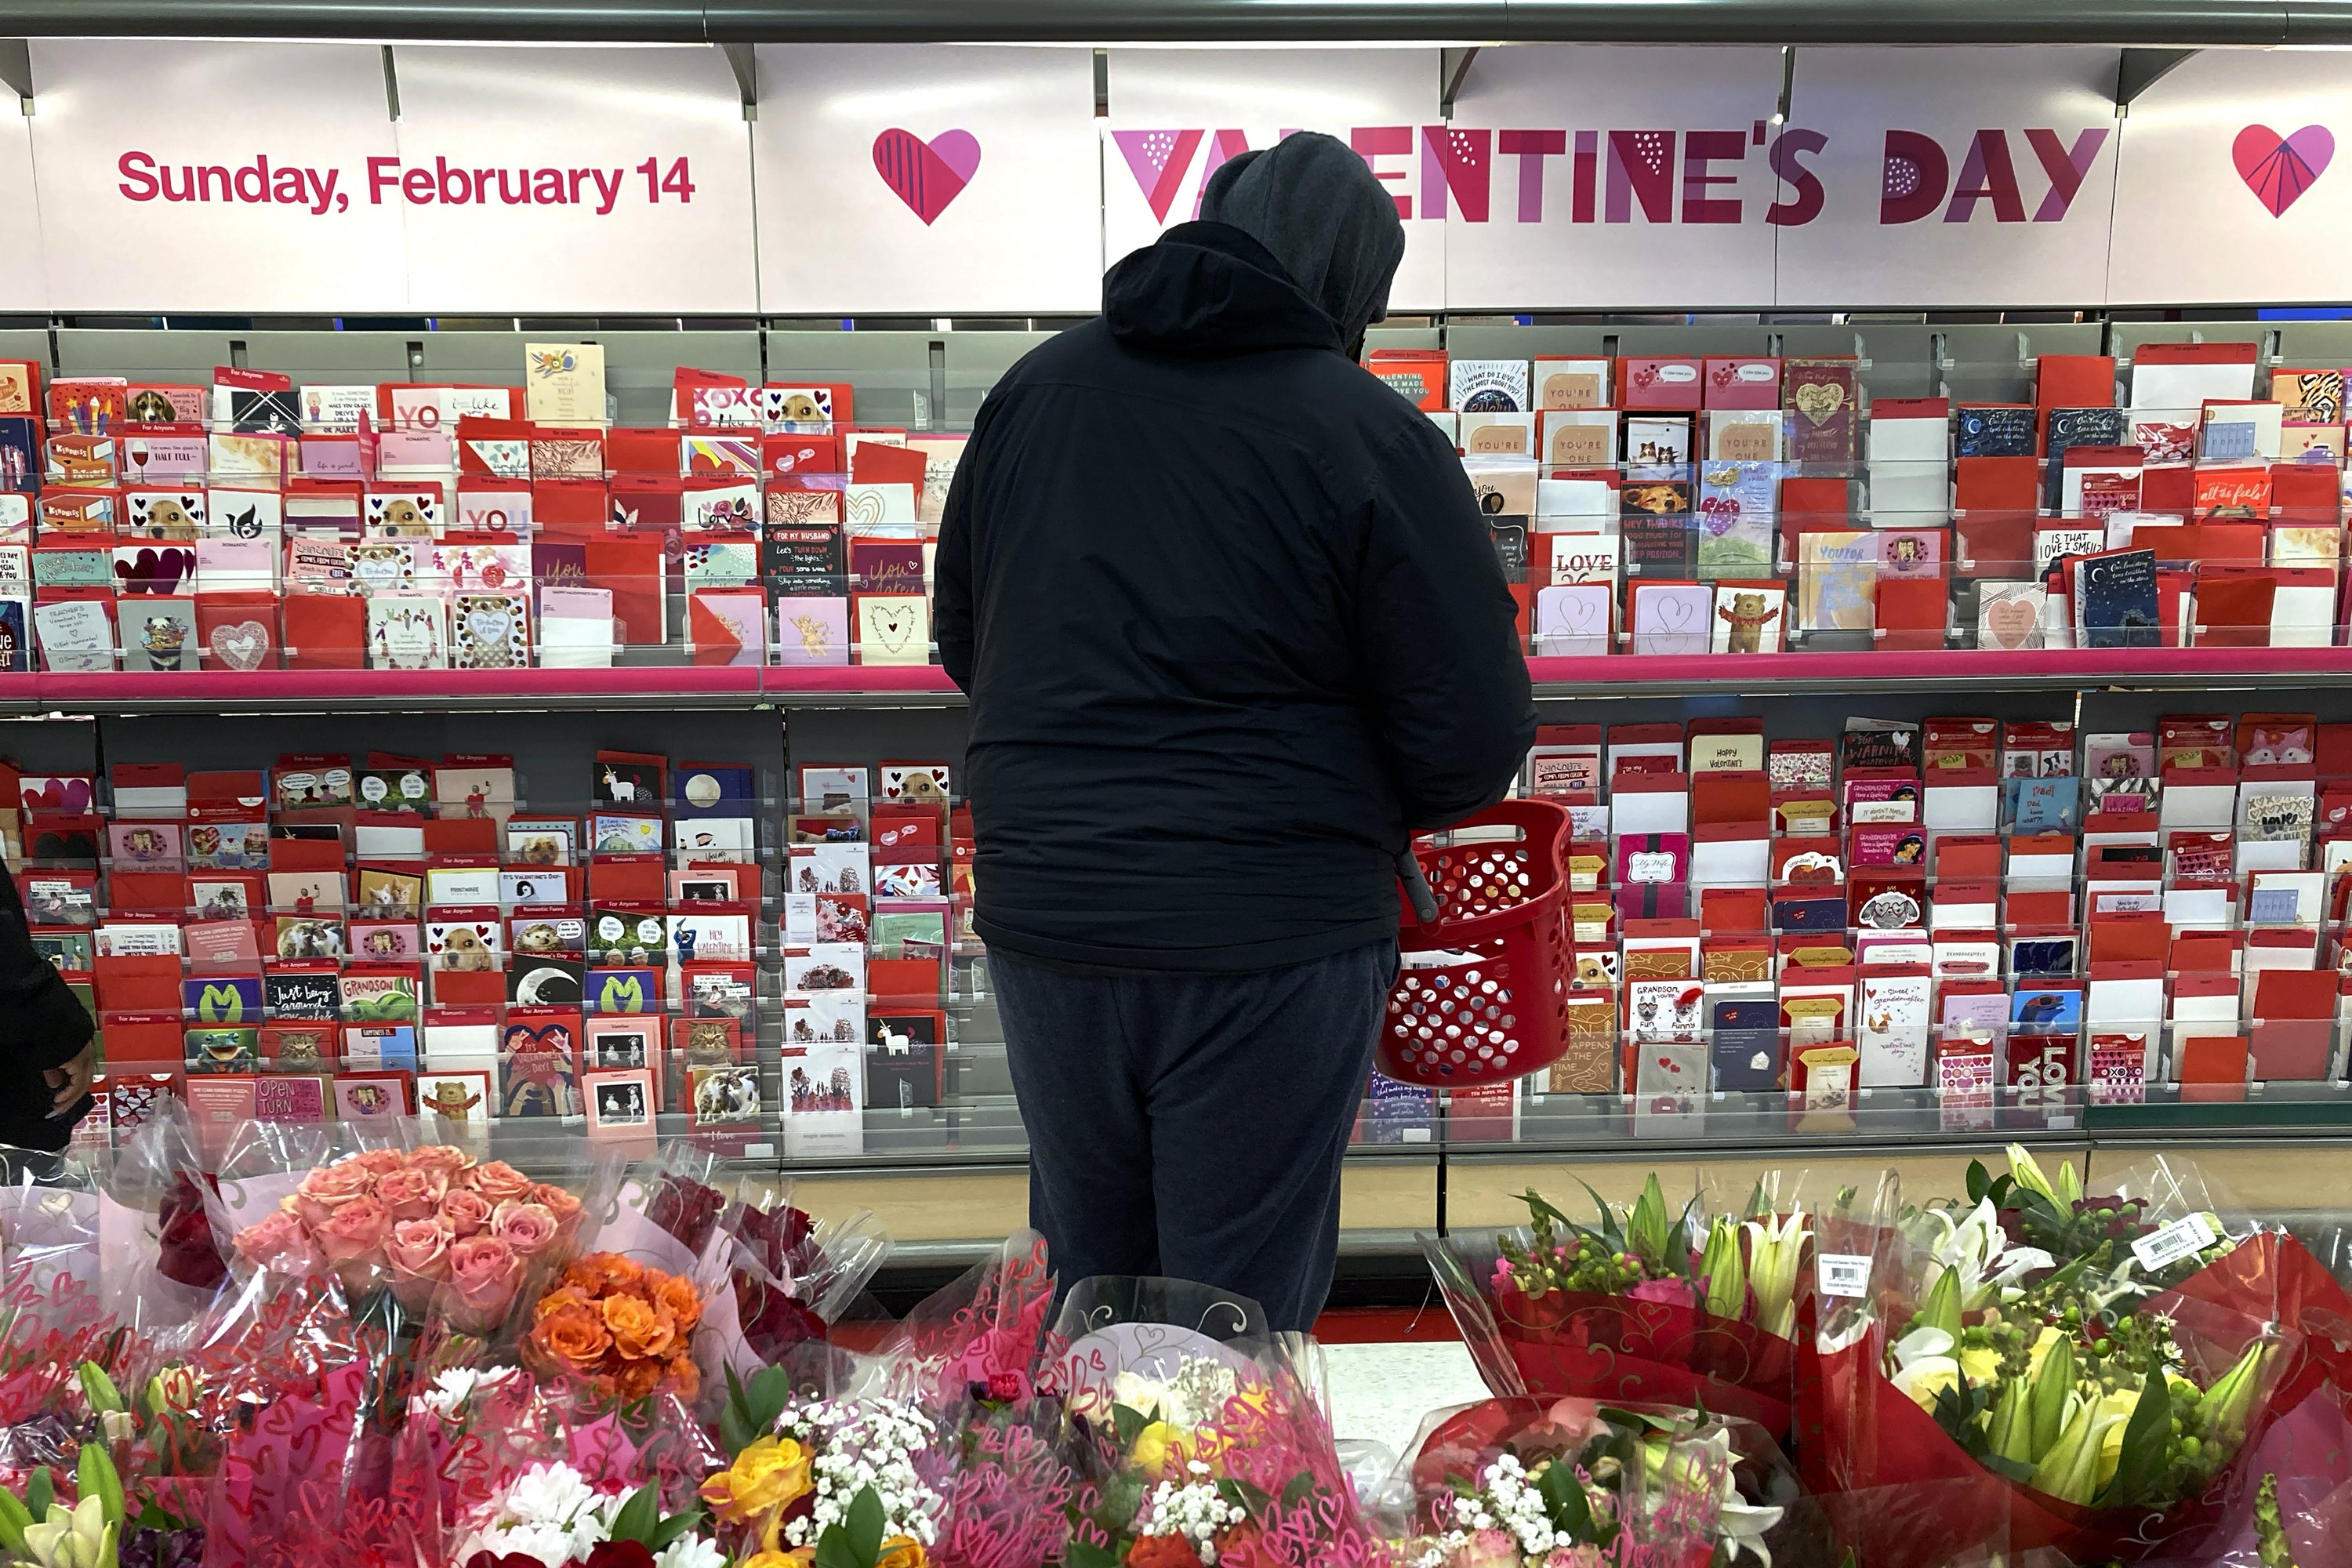 A gloomy Valentine’s Day, lovers find hope in roses, vaccines